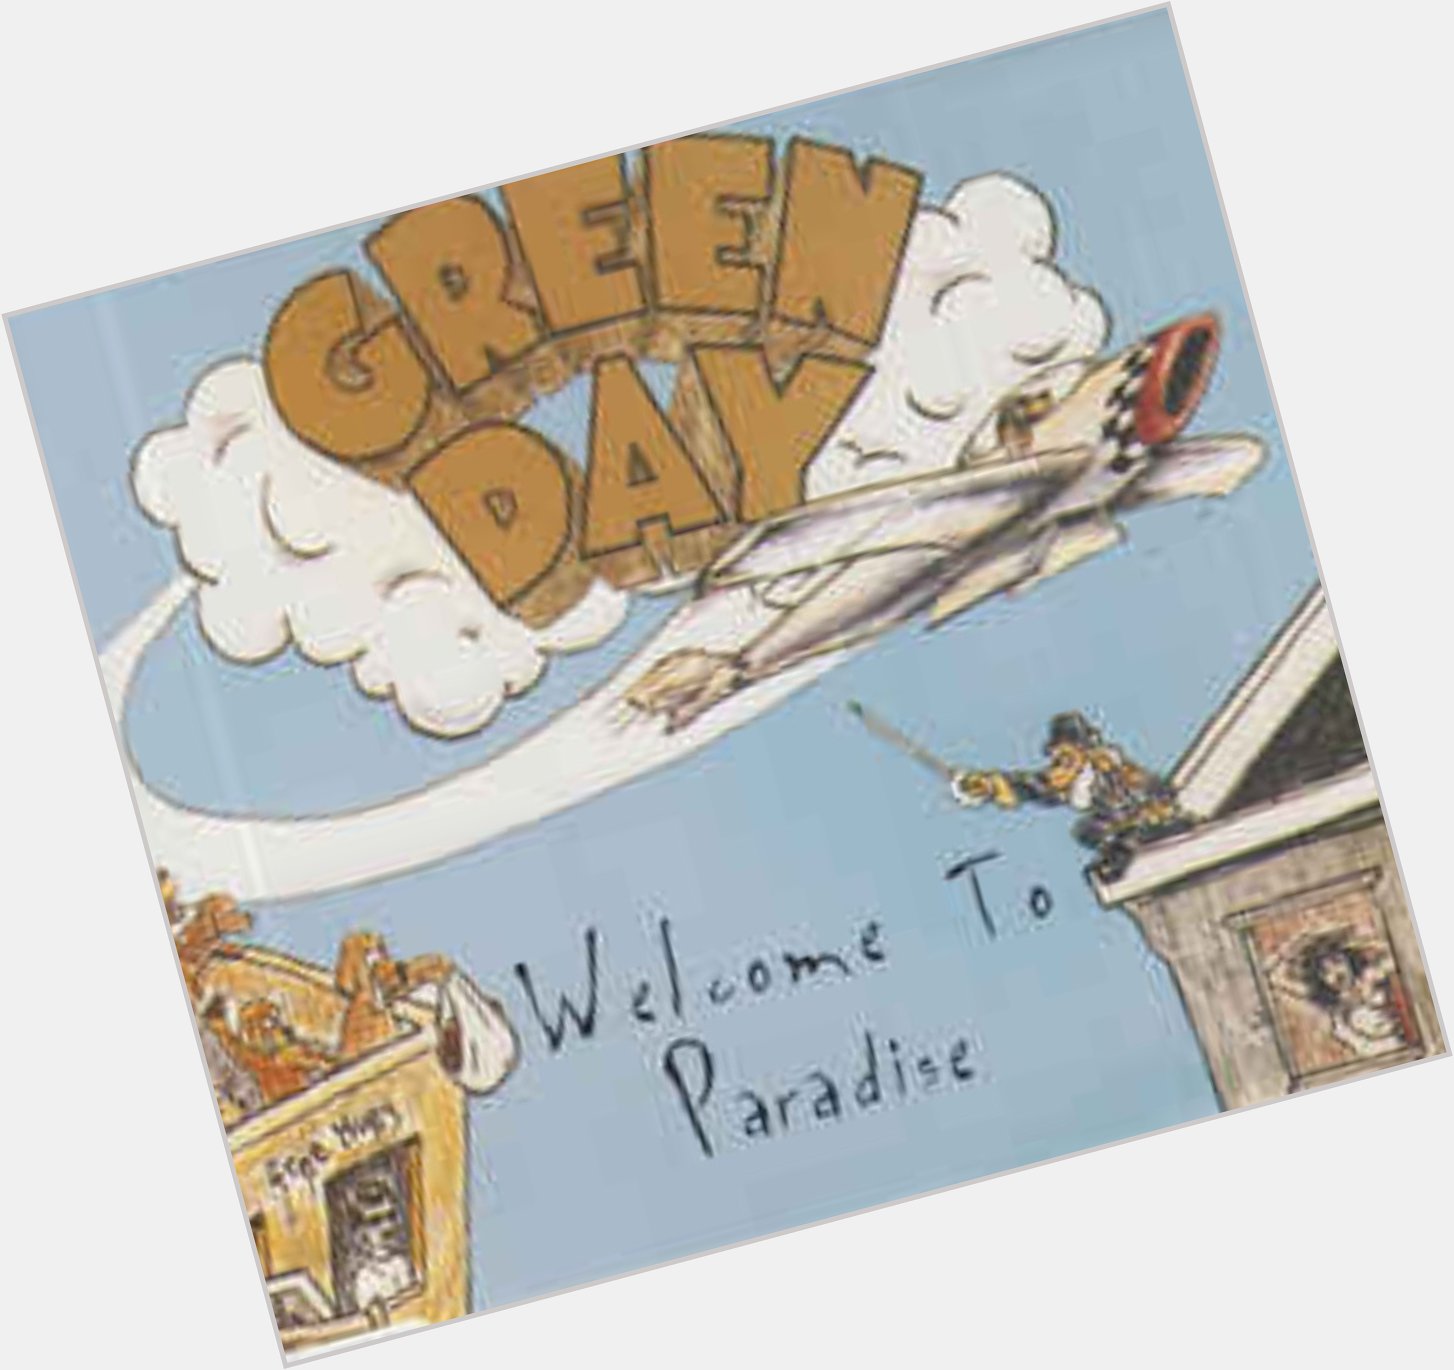 Happy Birthday to my old friend Green Day s Mike Dirnt! Here is the cover of the single for Welcome To Paradise 